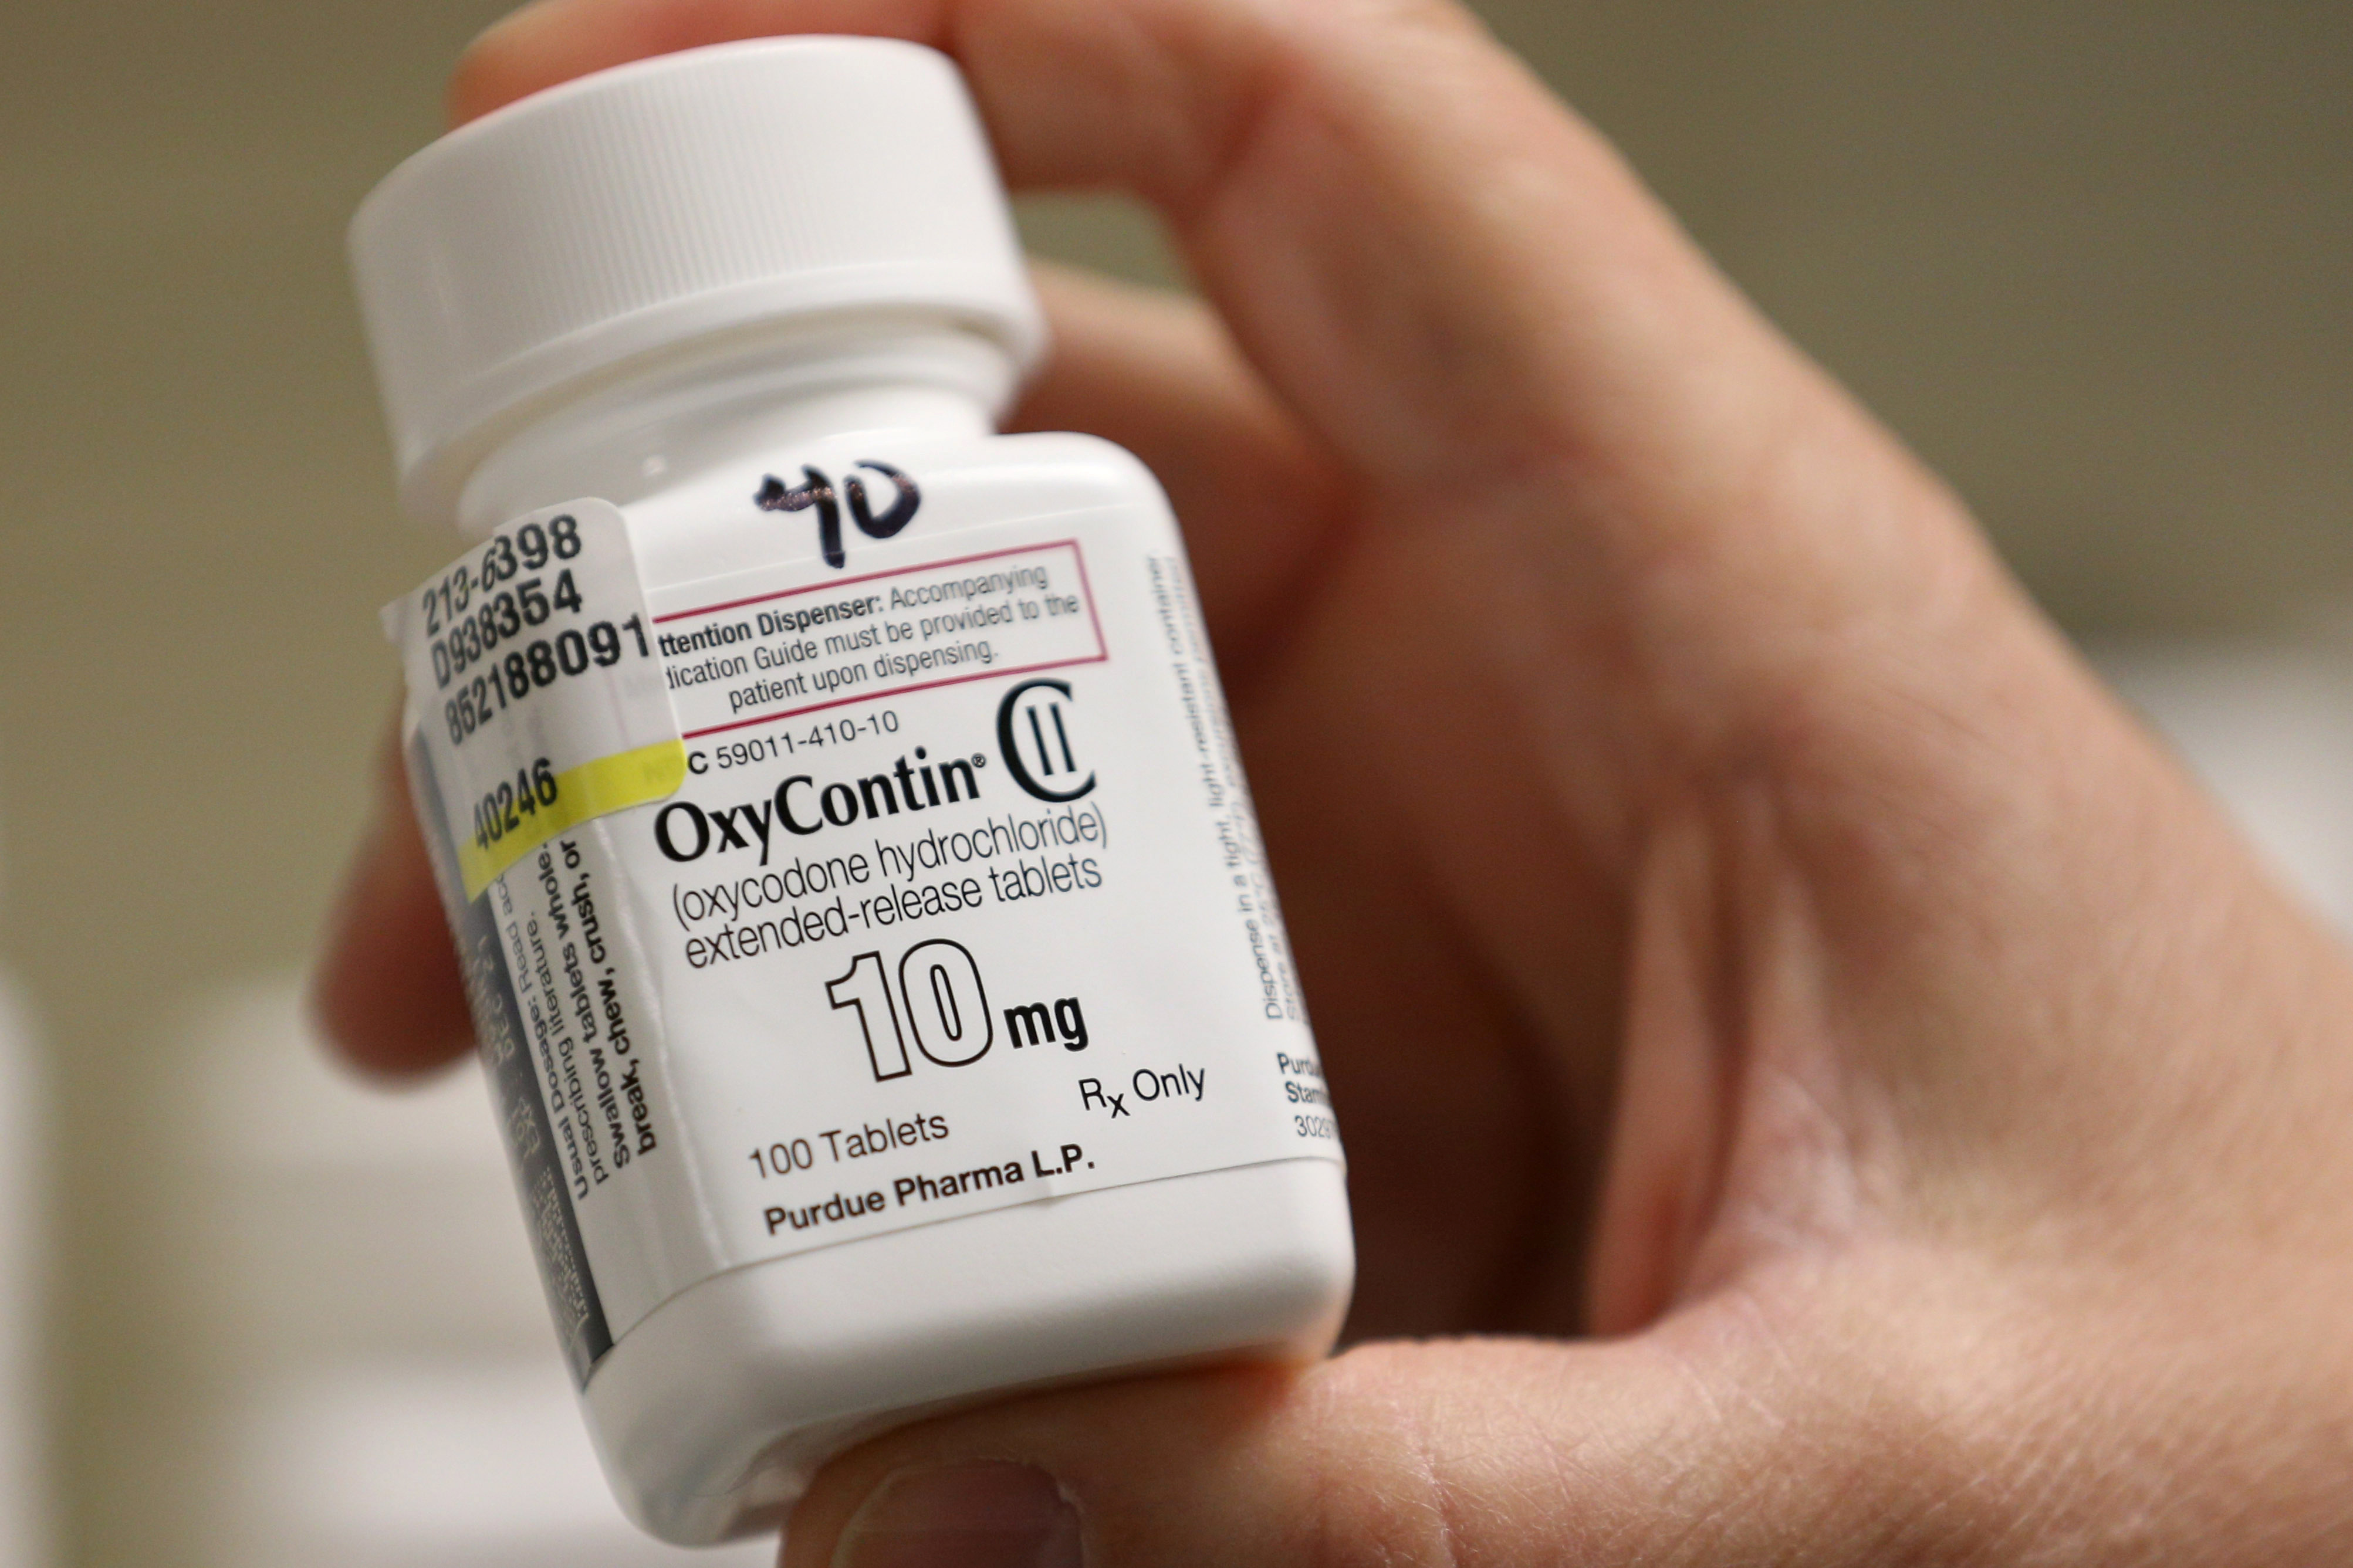 A pharmacist holds a bottle OxyContin made by Purdue Pharma at a pharmacy in Provo, Utah